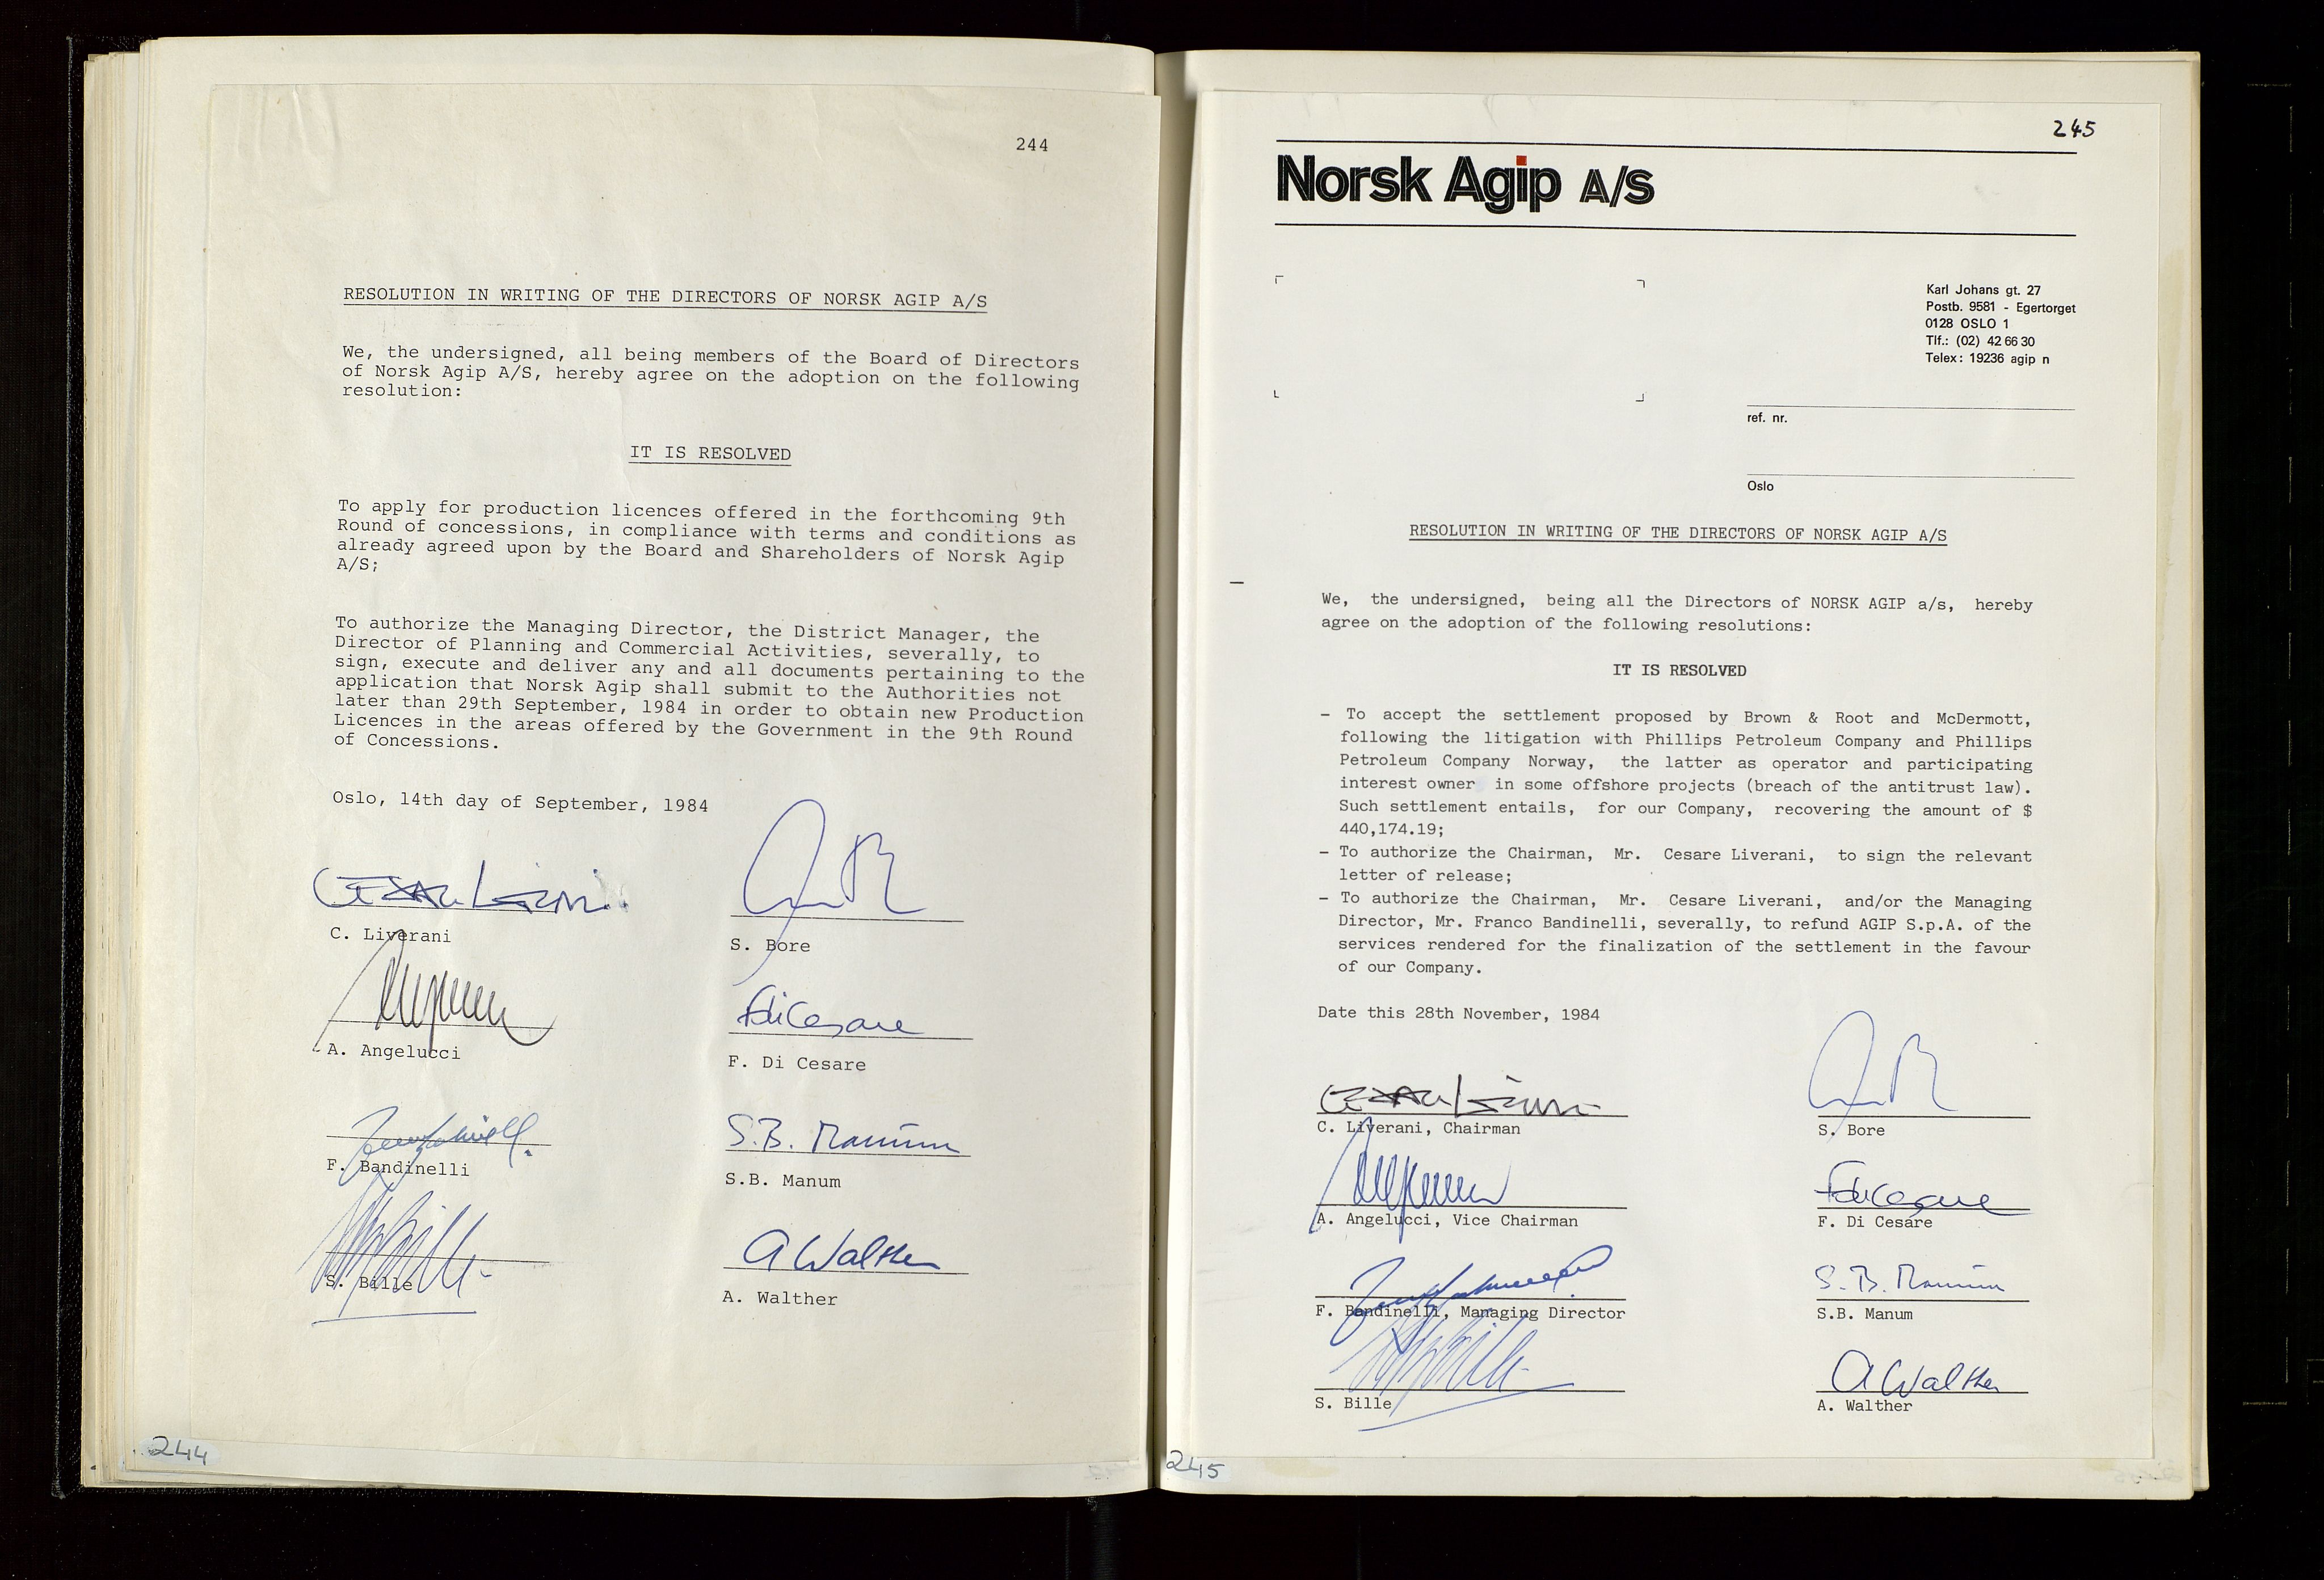 Pa 1583 - Norsk Agip AS, SAST/A-102138/A/Aa/L0003: Board of Directors meeting minutes, 1979-1983, s. 244-245